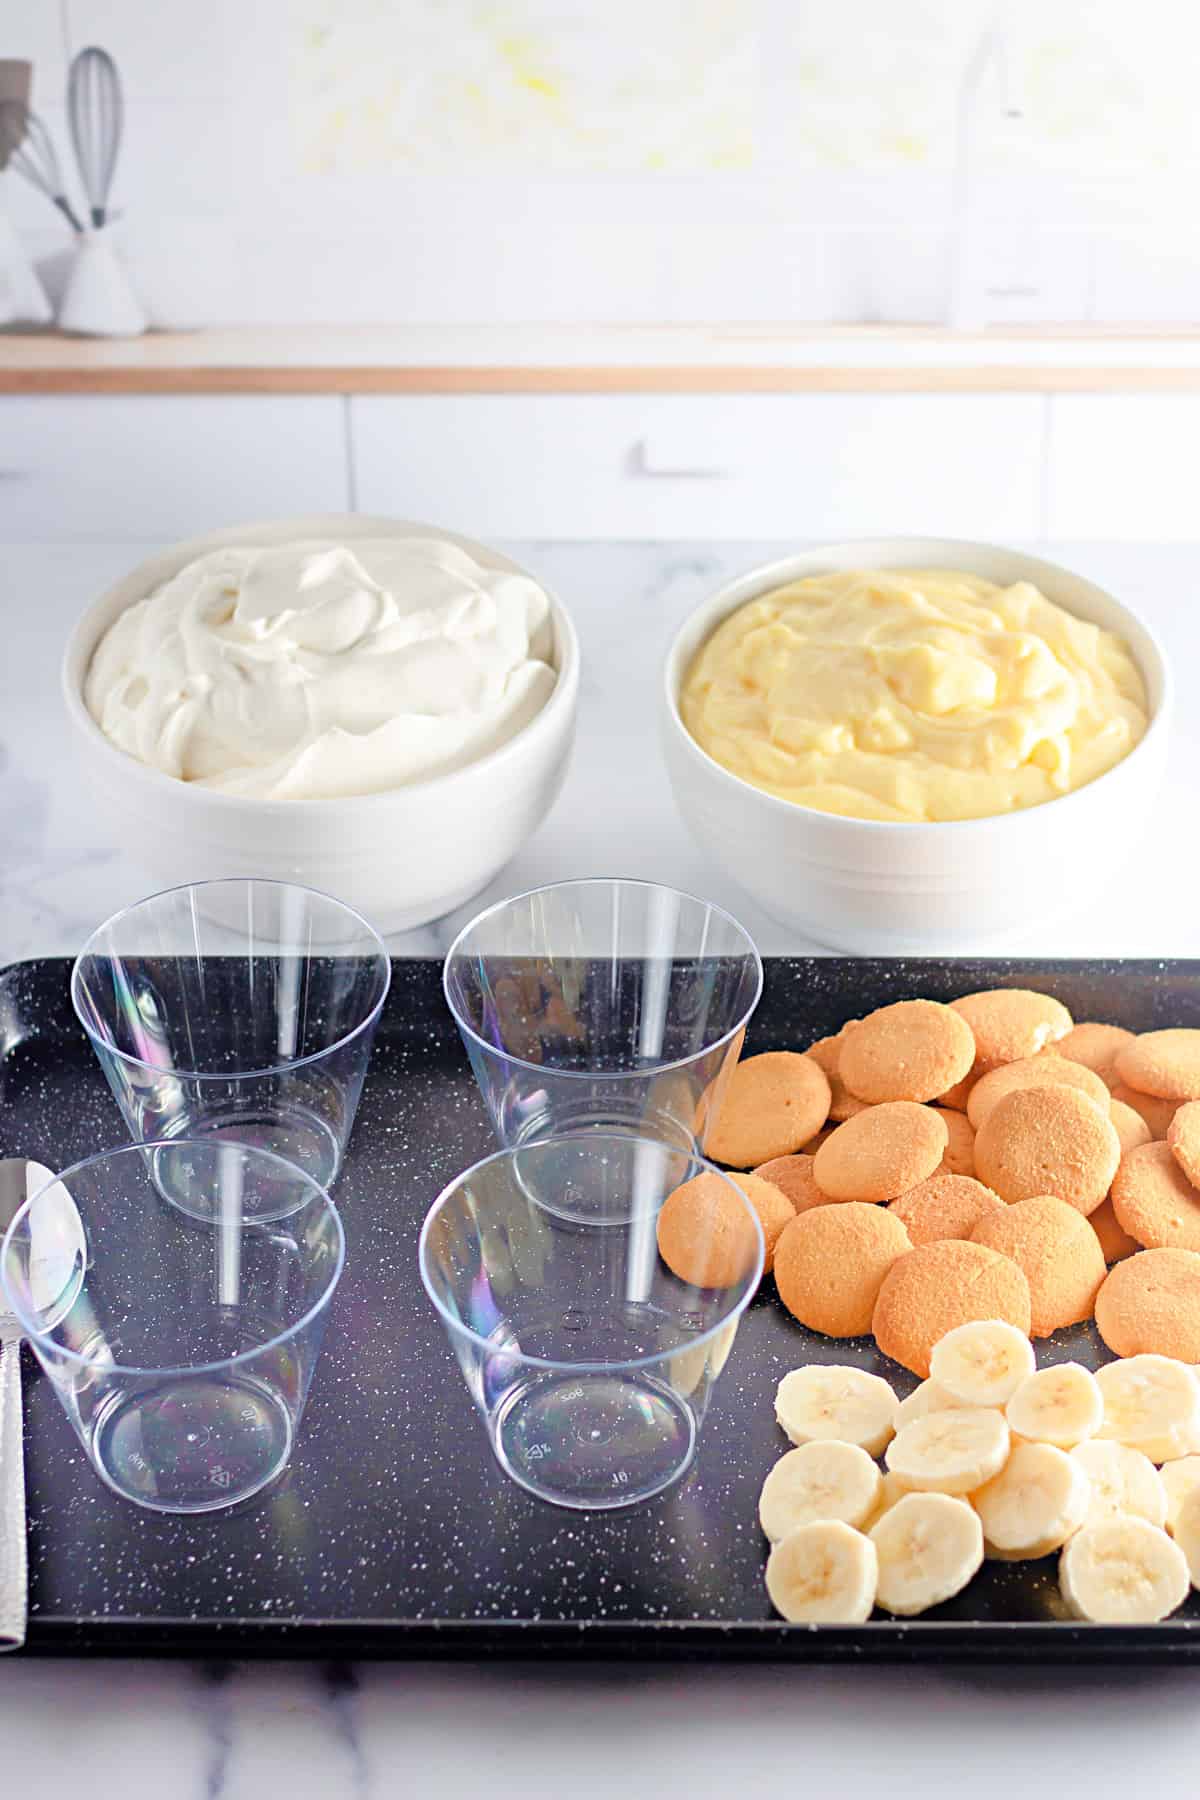 Tray of cups, sliced banana, nilla wafers, plus bowls of whipped cream and vanilla pudding.